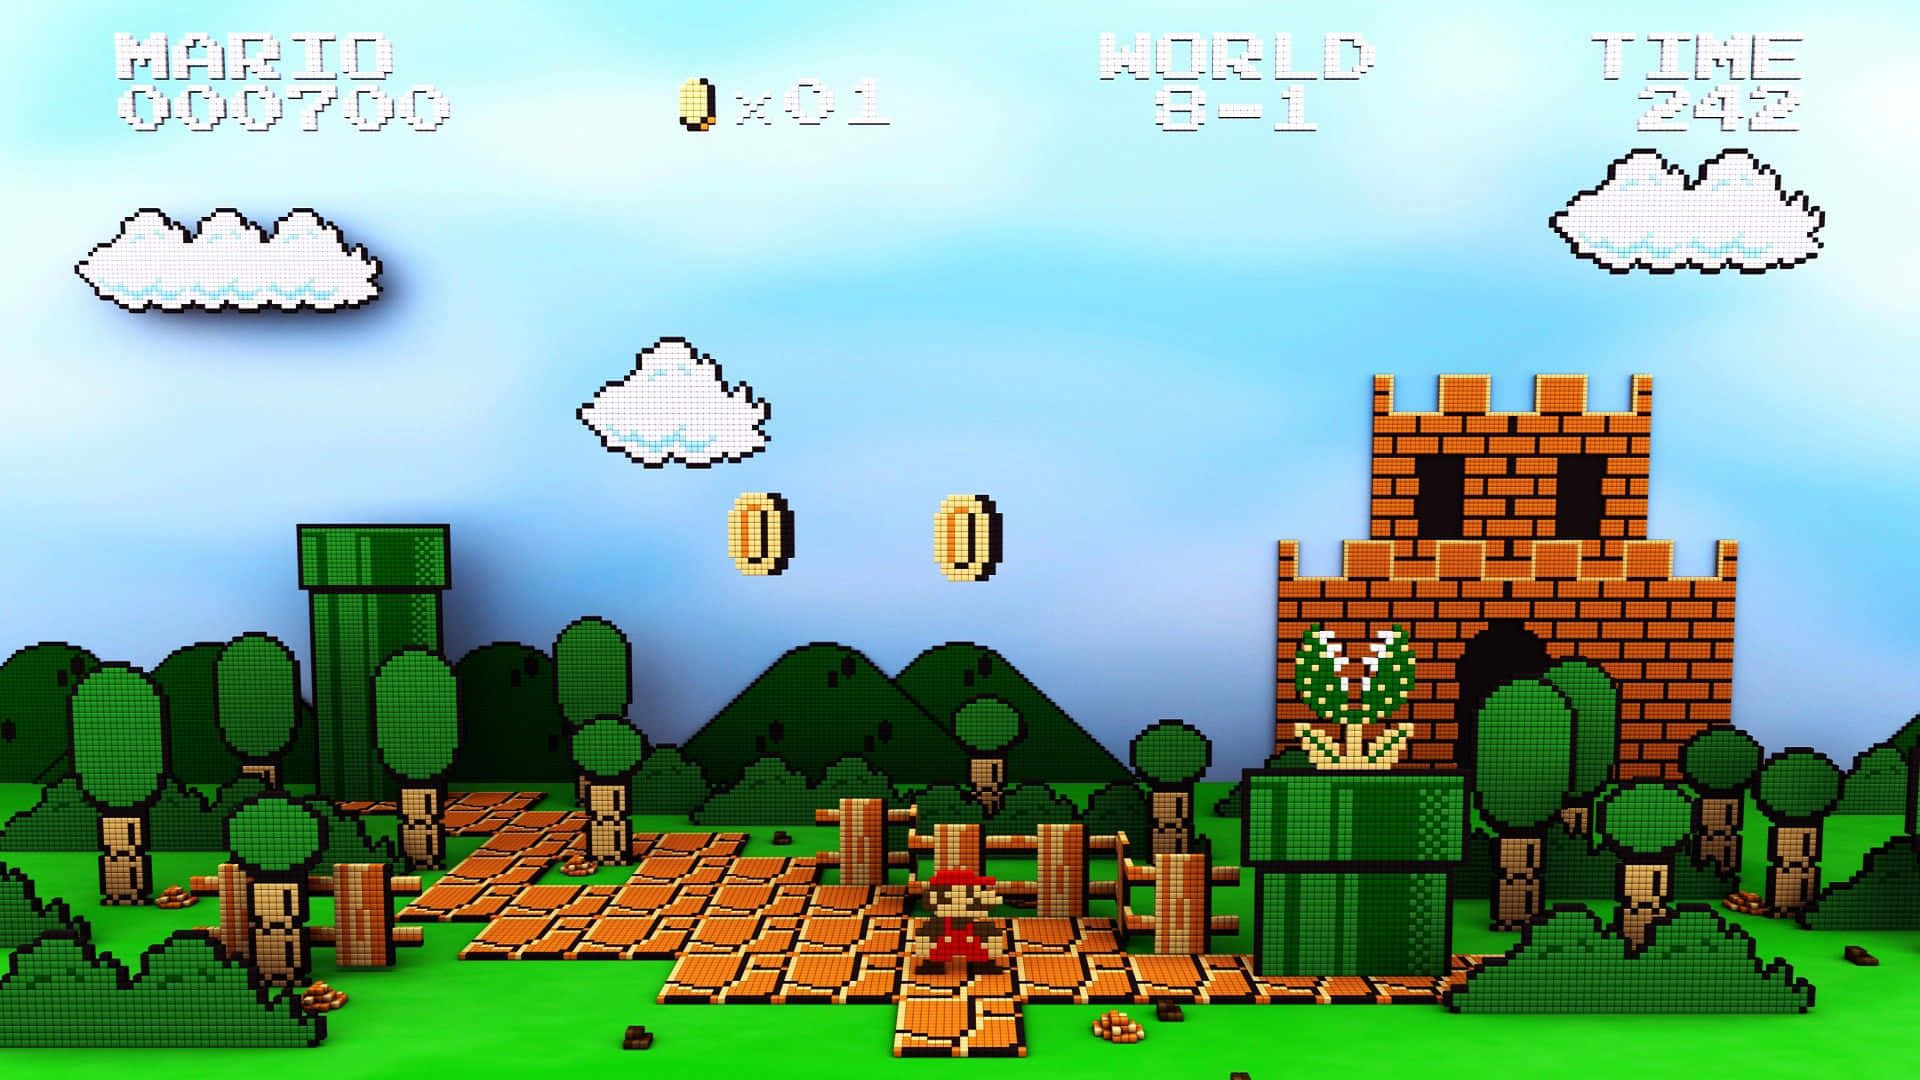 A Nintendo Mario Game With A Castle And Trees